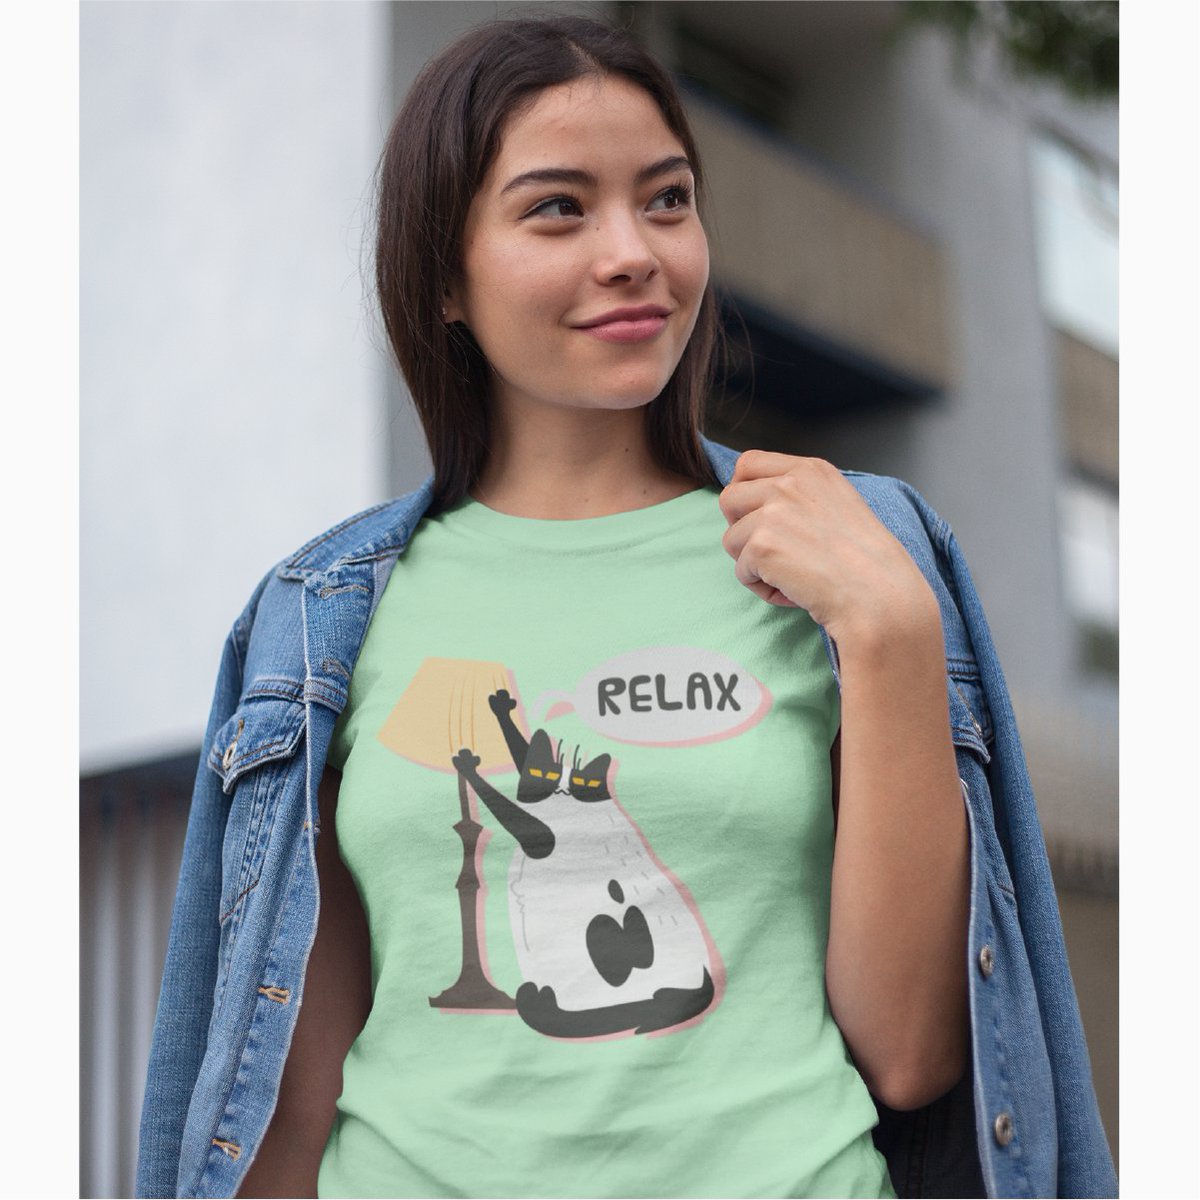 Get and flaunt this t-shirt👕👚 in your own style! Or offer it as a gift!🎁⁠ ⁠ Check the details to buy in the link below l8r.it/wV9B #cutecats #tshirtdesign #tshirtslovers #kawaiistuff #cutecats #ilovemycat #catlover #tshirtshop #newstyle